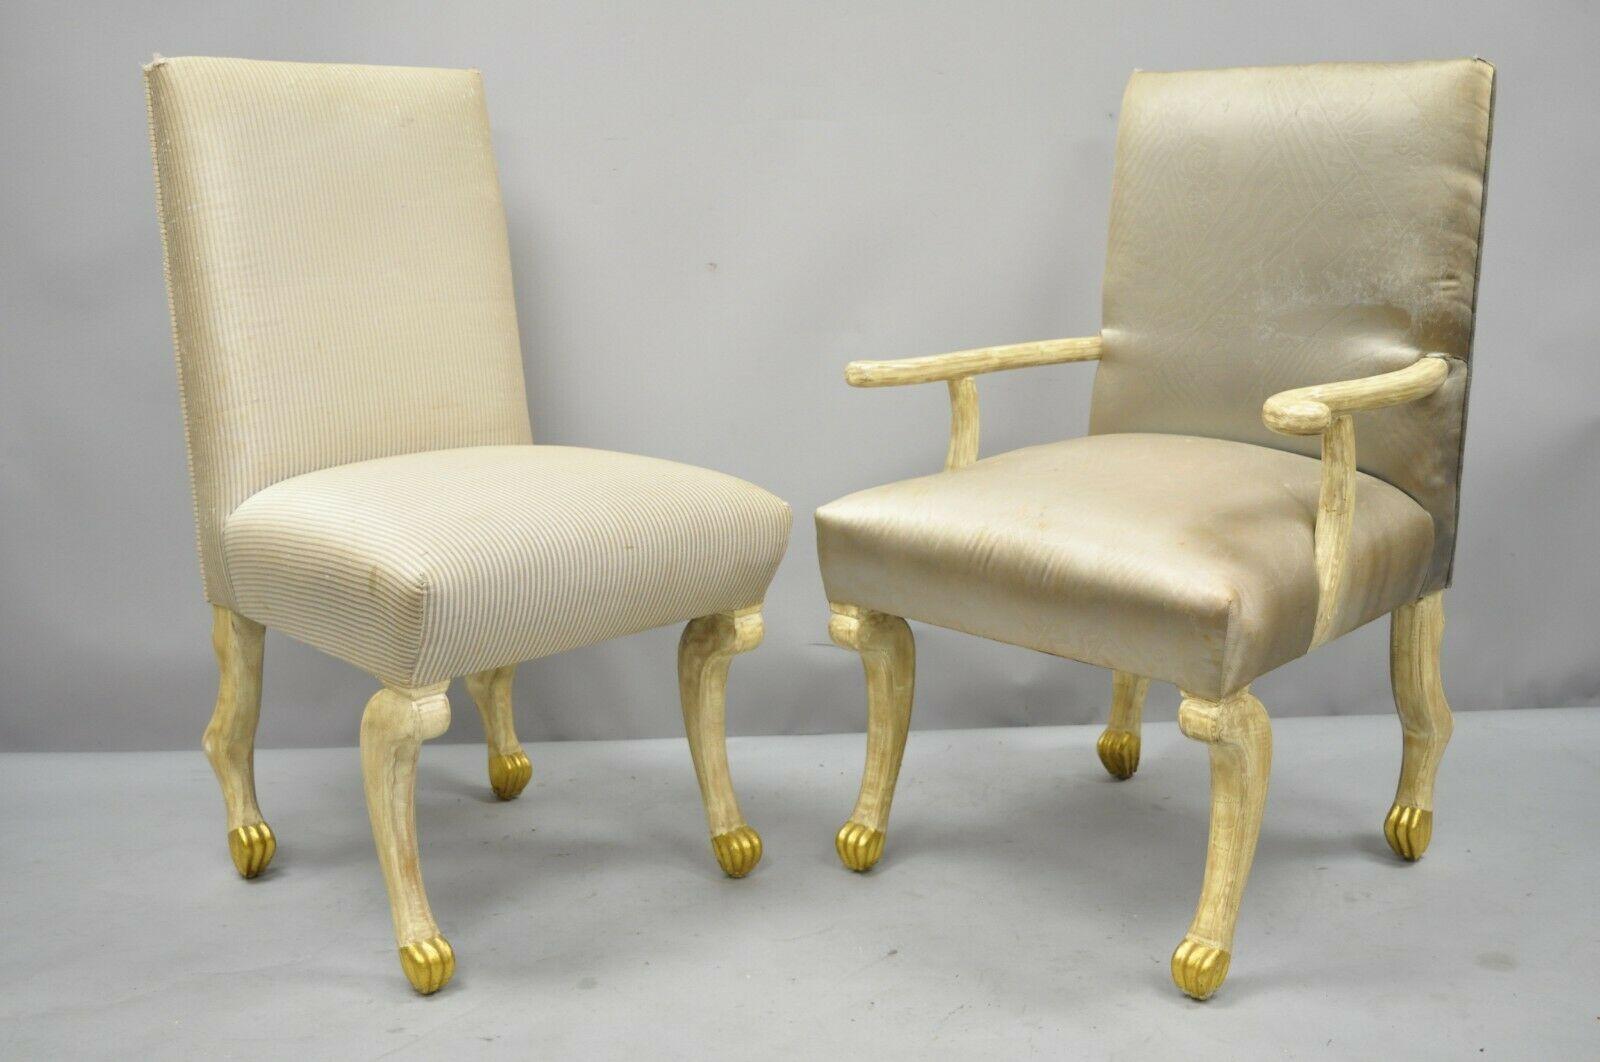 8 hoof paw foot Regency style dining chairs after the Etruscan chair by John Dickinson. Listing includes (2) Armchairs, (6) side chairs, cream and gold gilt distressed finish, hoof or paw feet and legs, solid wood frame, upholstered seat, great